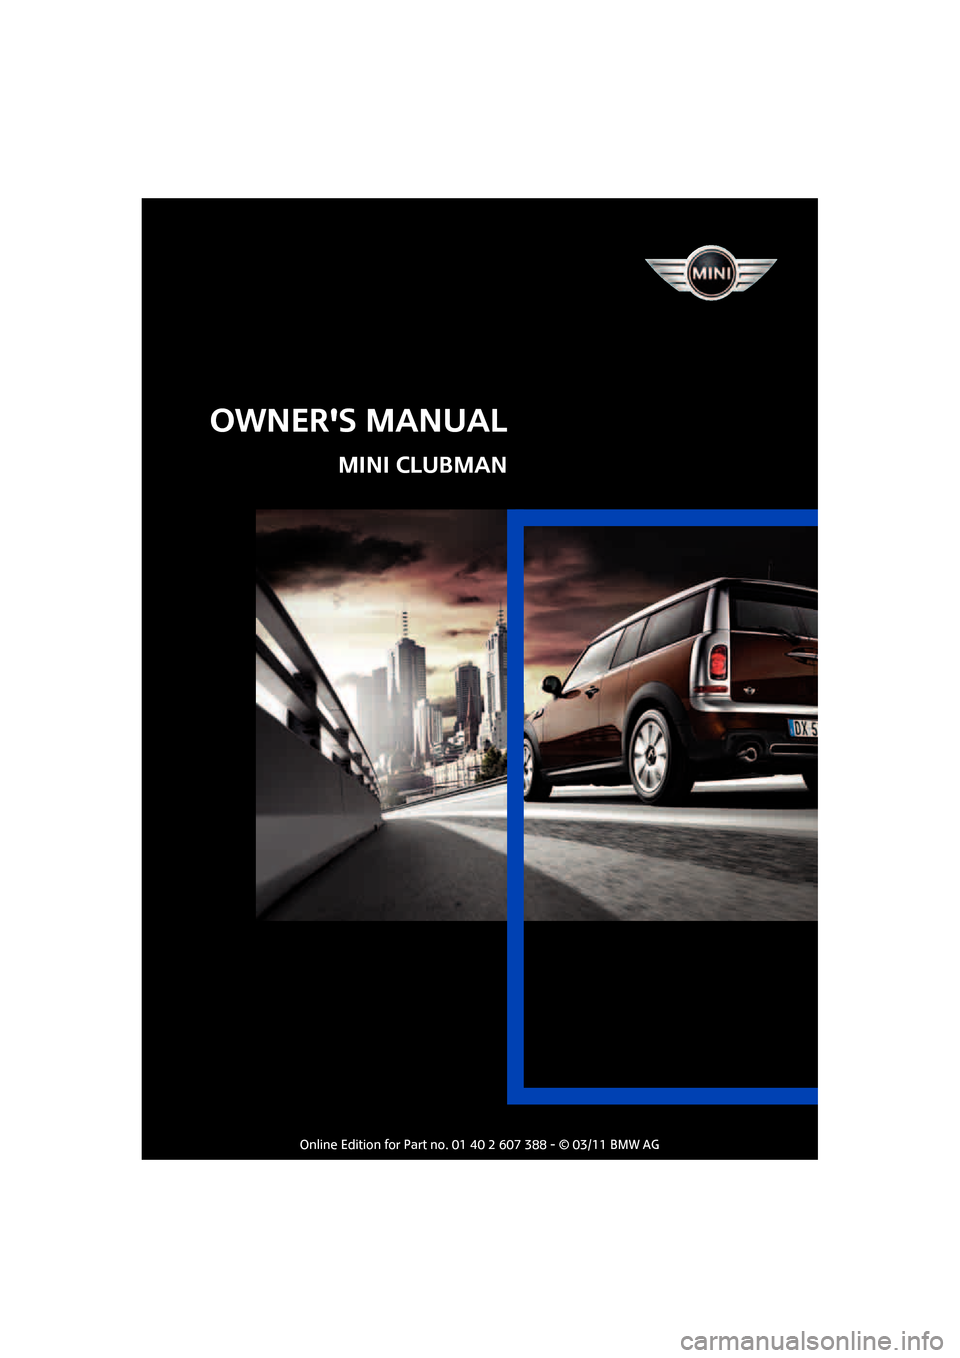 MINI Clubman 2011  Owners Manual (Mini Connected)   
OWNERS MANUAL
MINI CLUBMAN 